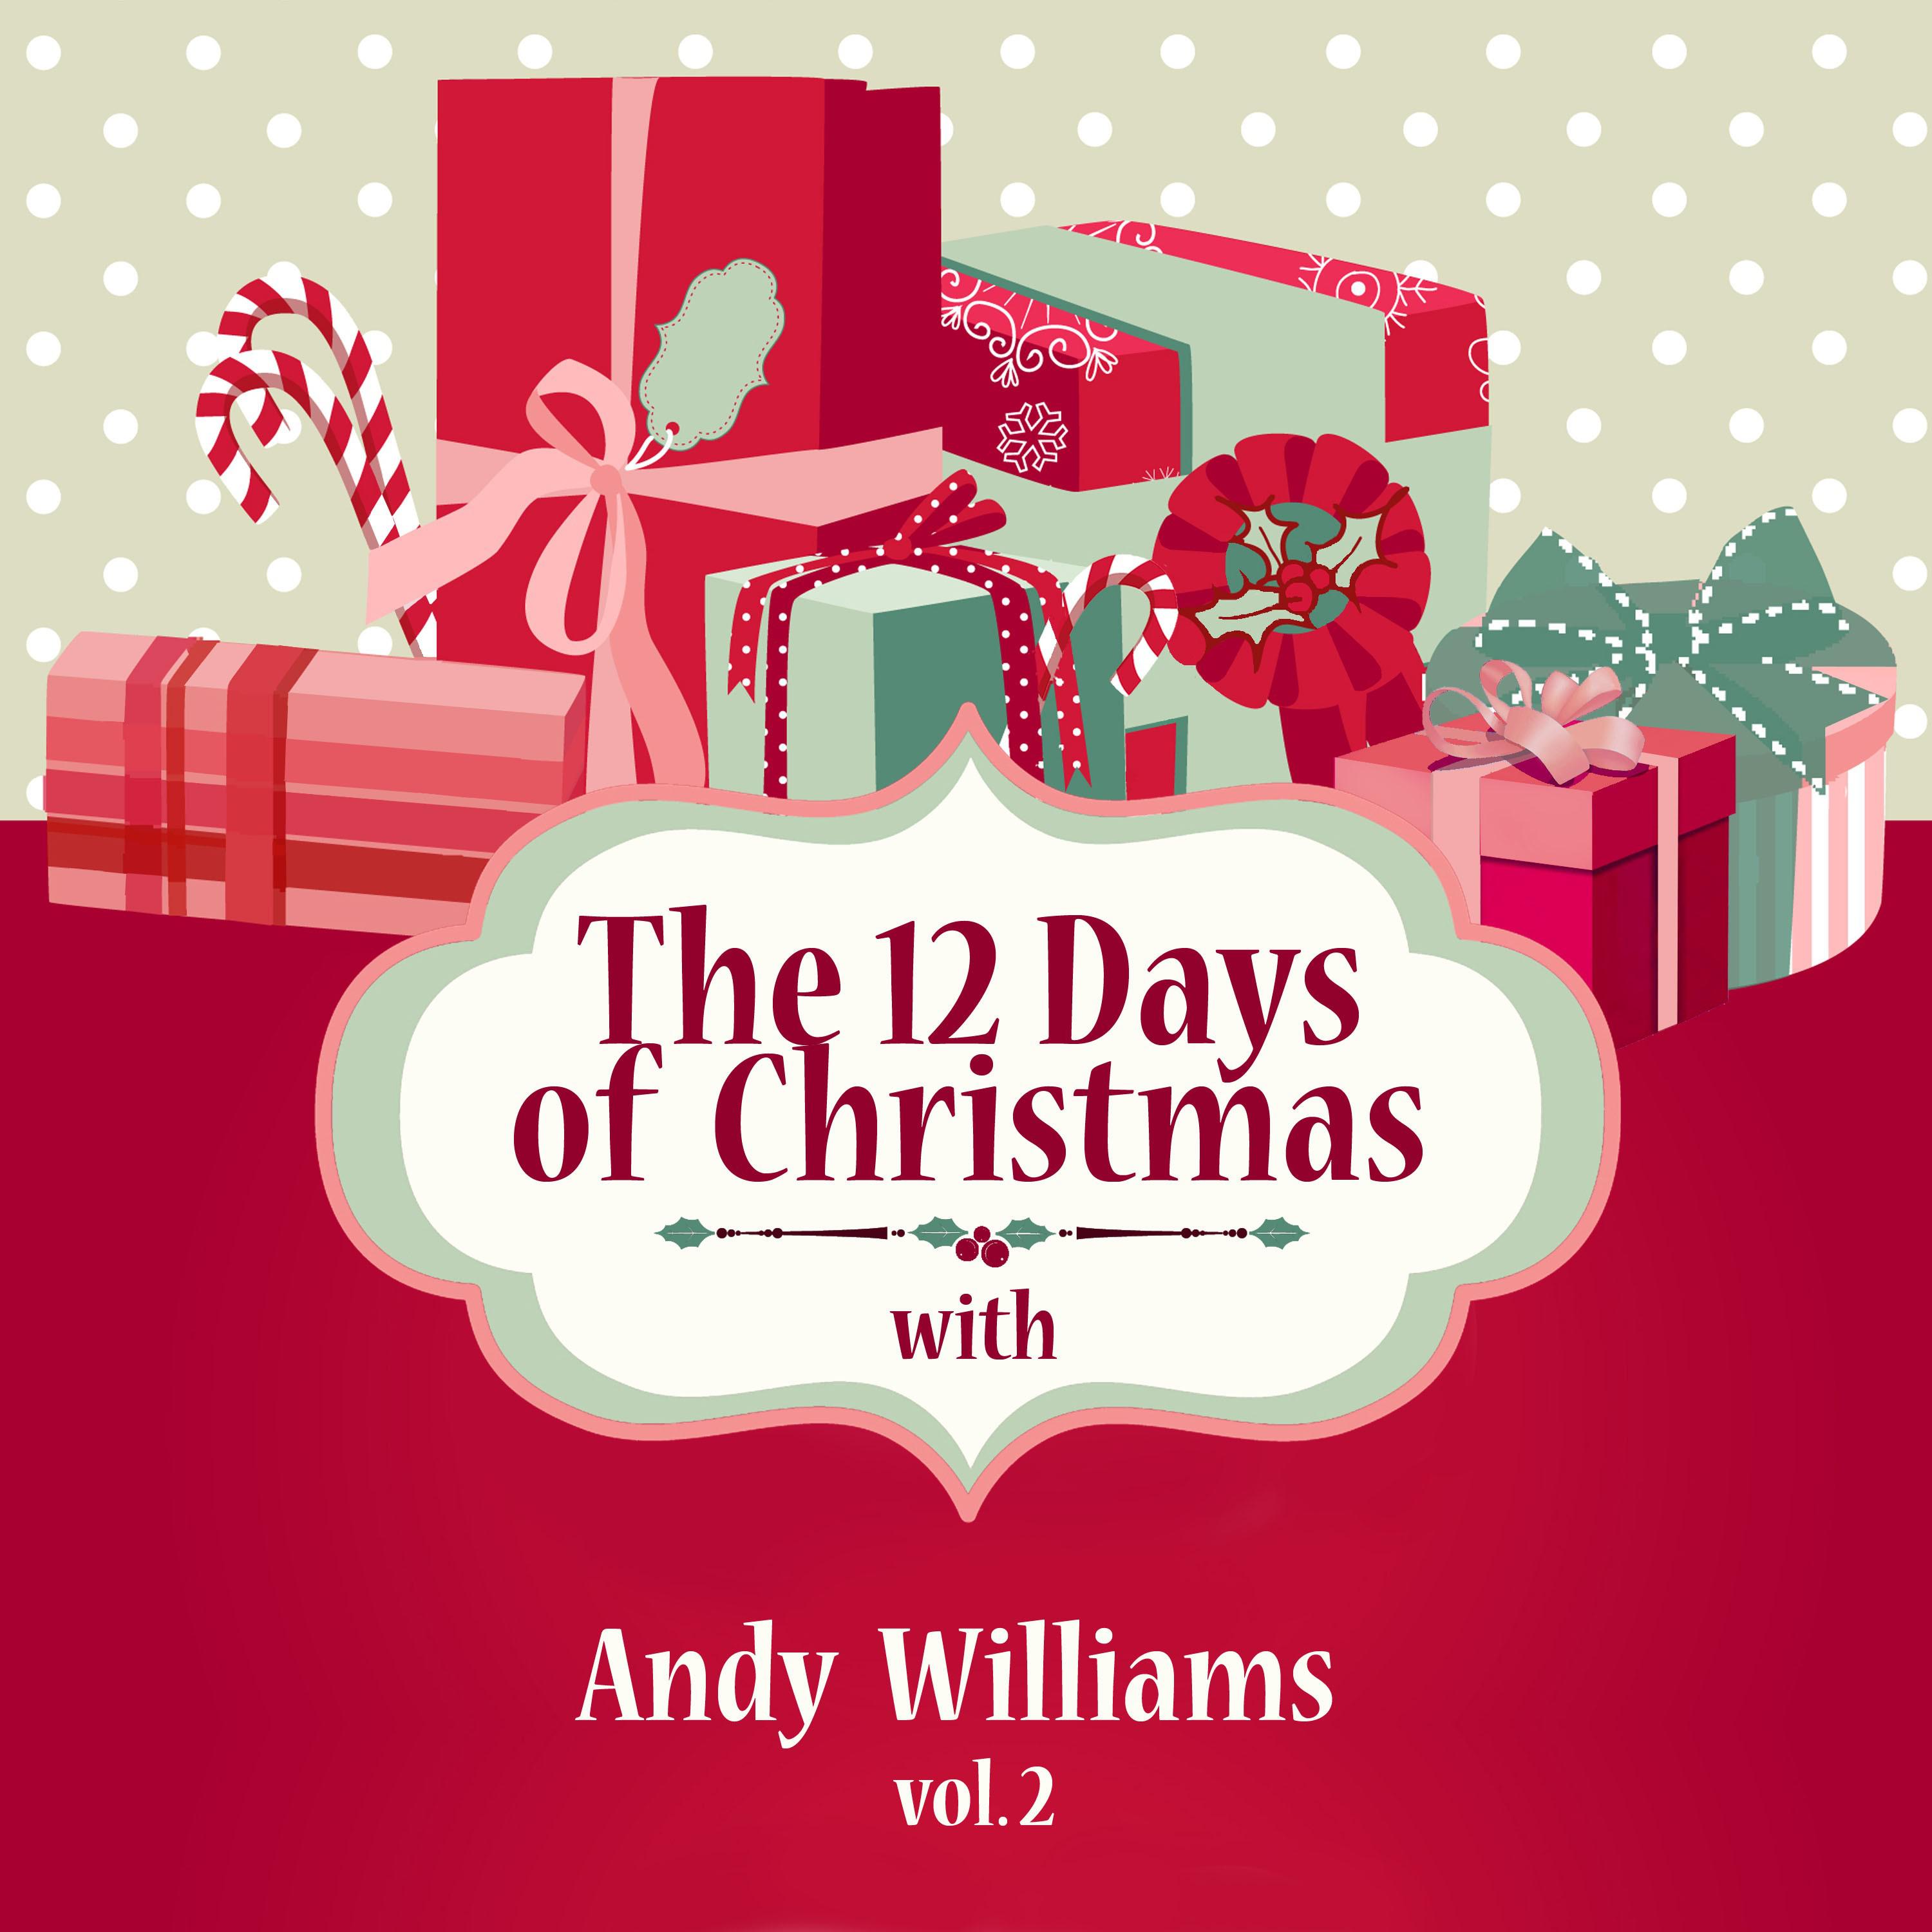 The 12 Days of Christmas with Andy Williams, Vol. 2